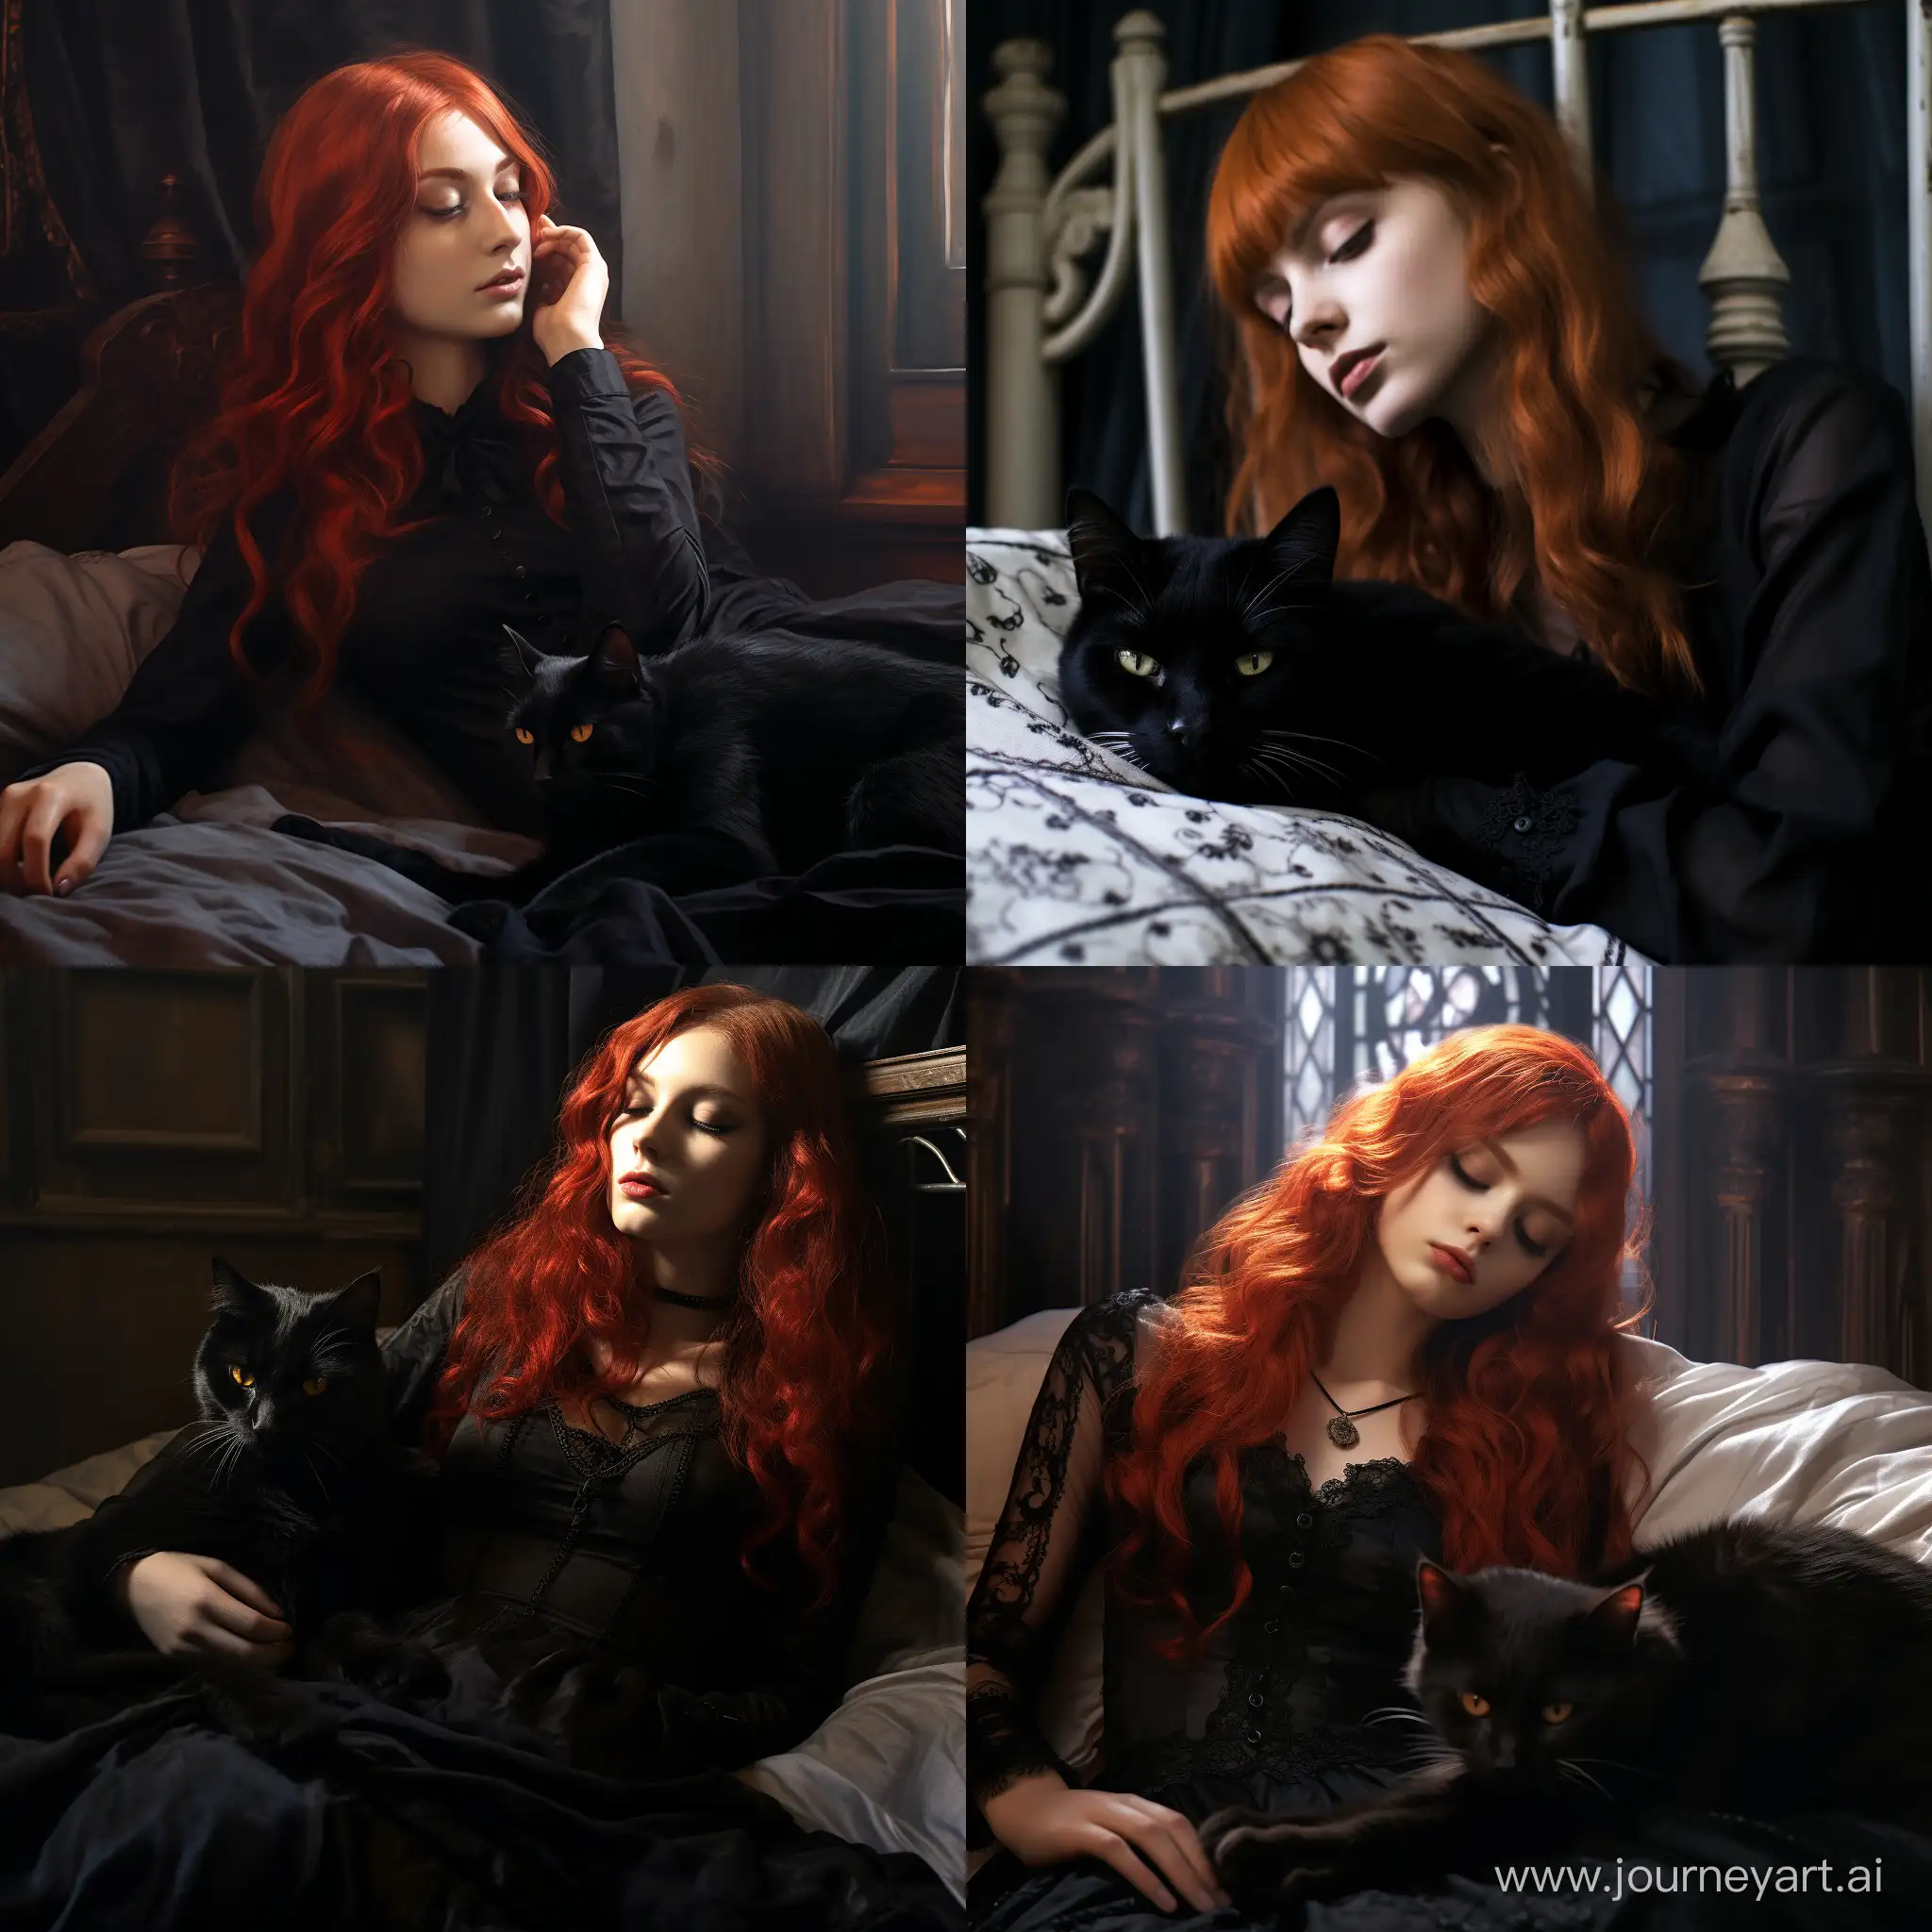 Enchanting-Gothic-Nap-with-RedHaired-Girl-and-Feline-Companion